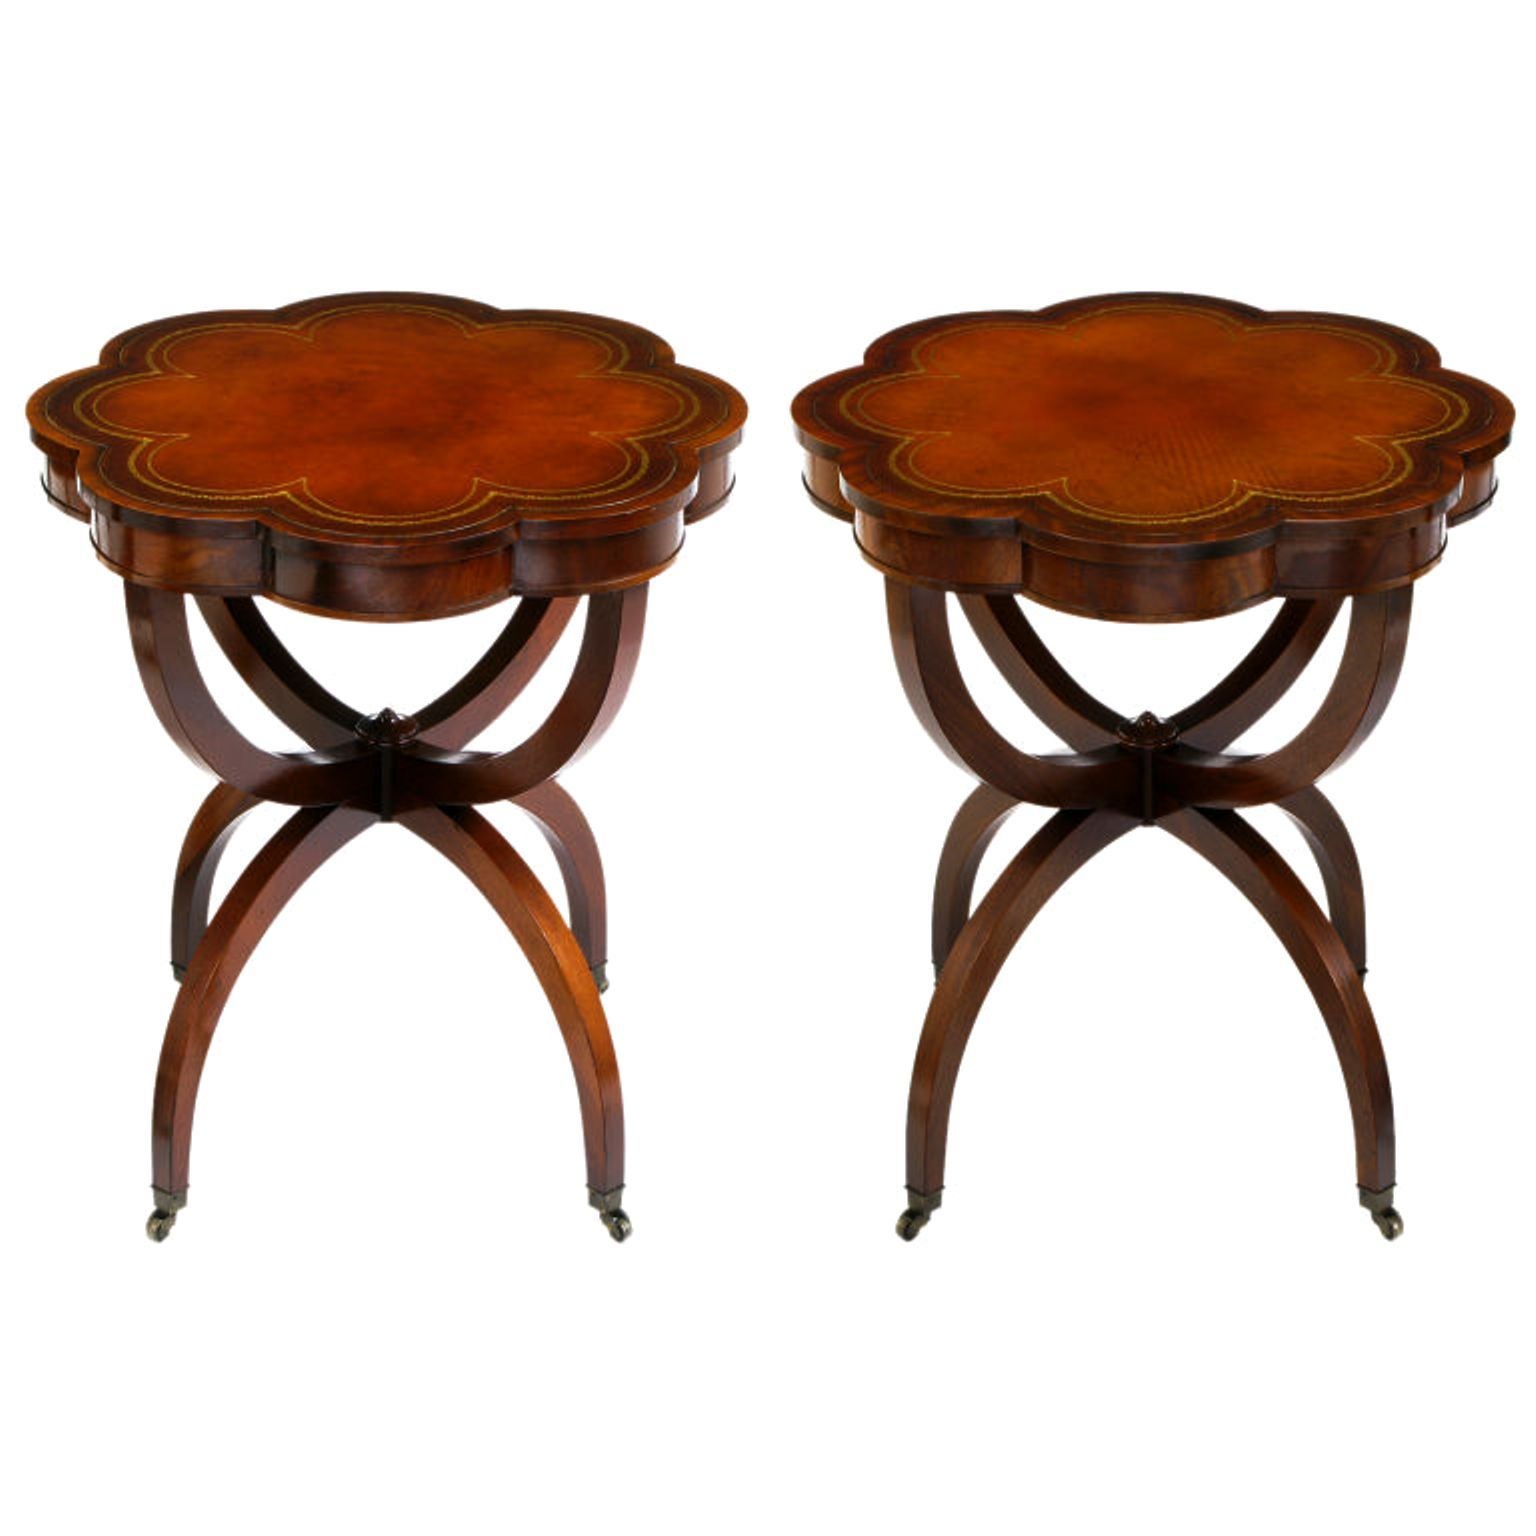 Regency End Tables In Mahogany With Octofoil Tooled Leather Top